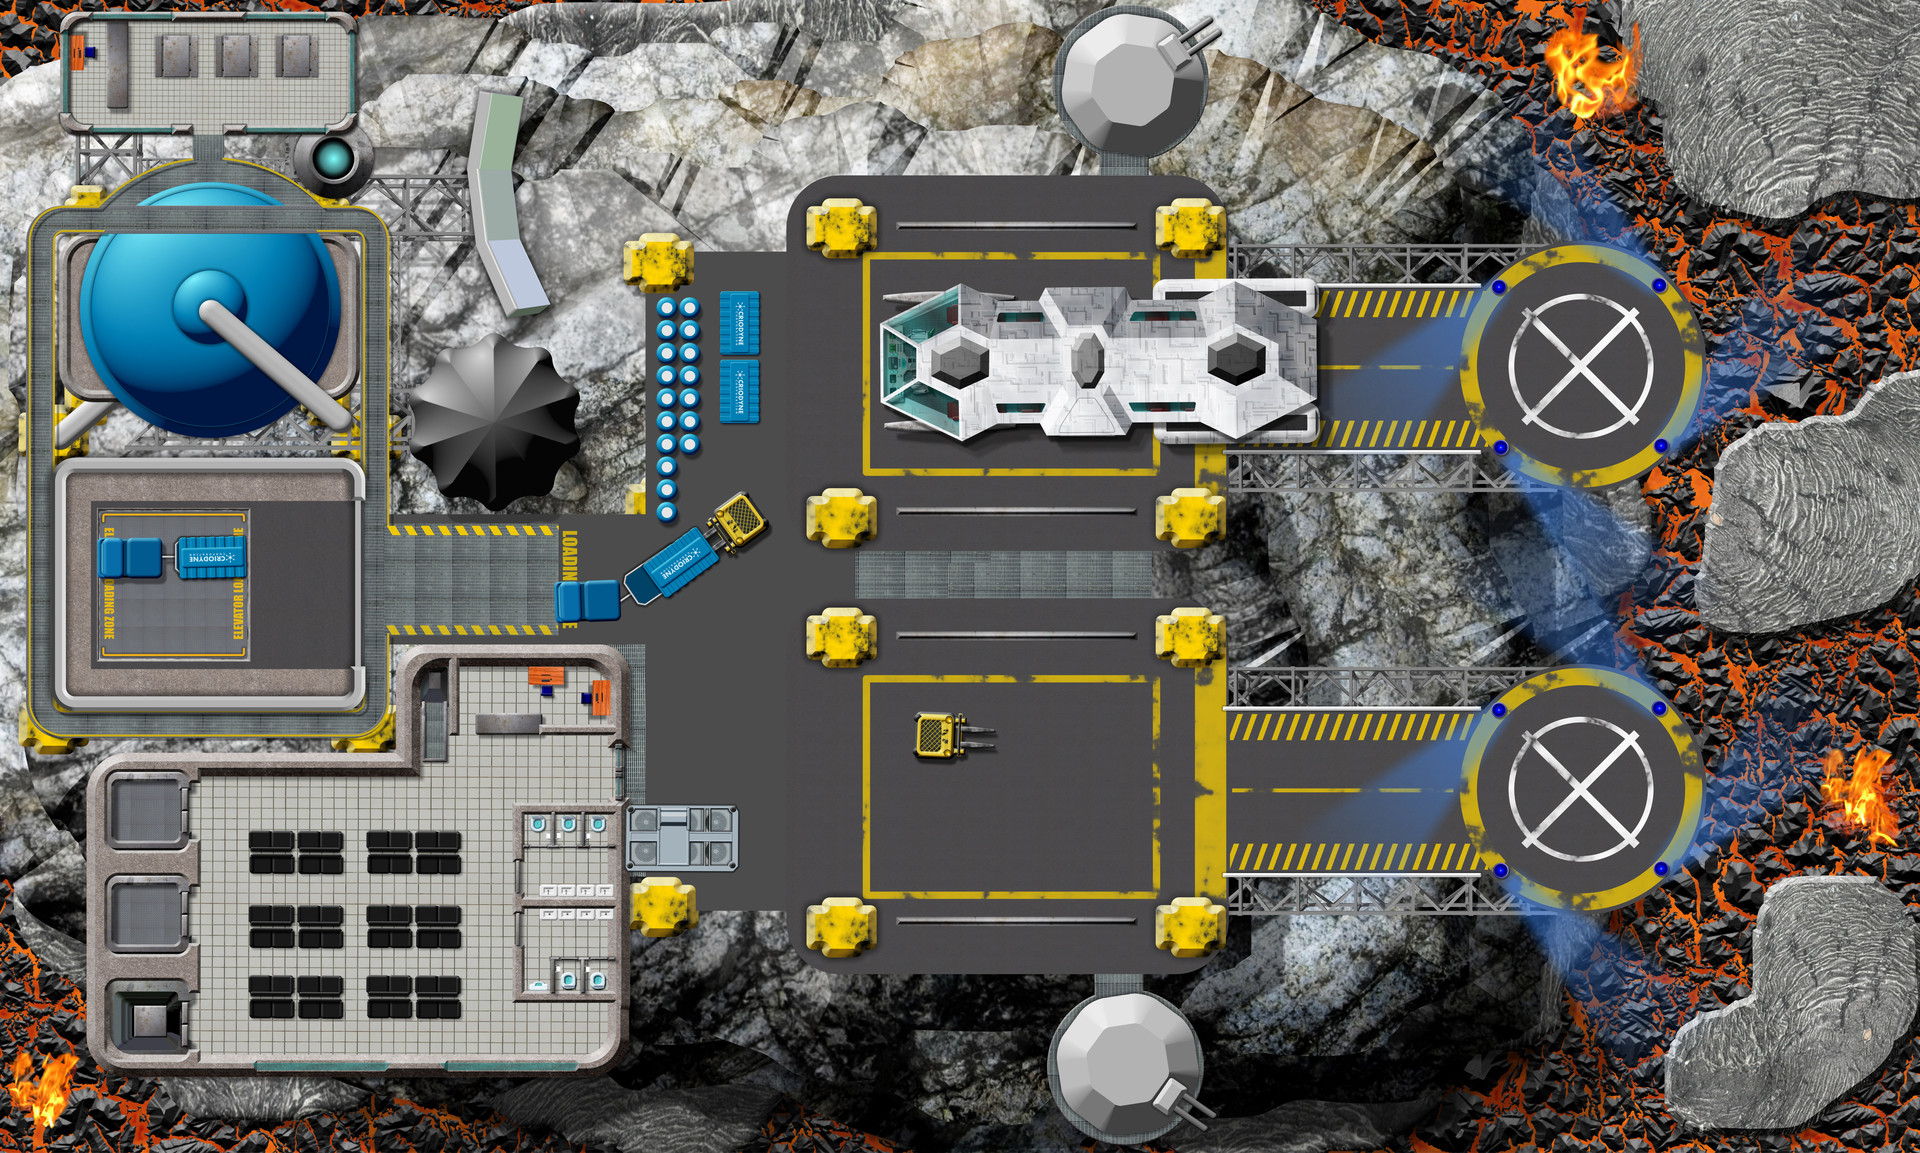 sci fi space station layout